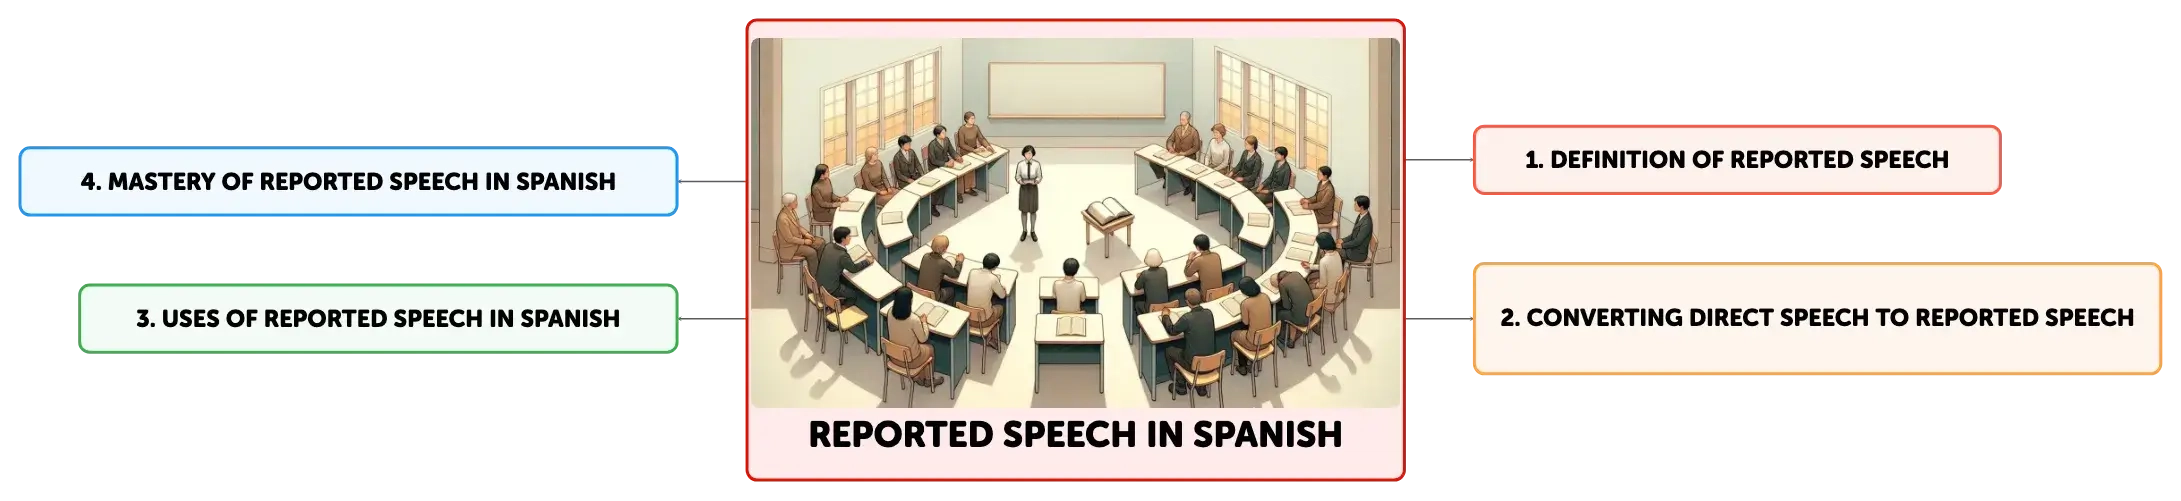 reported speech meaning in spanish